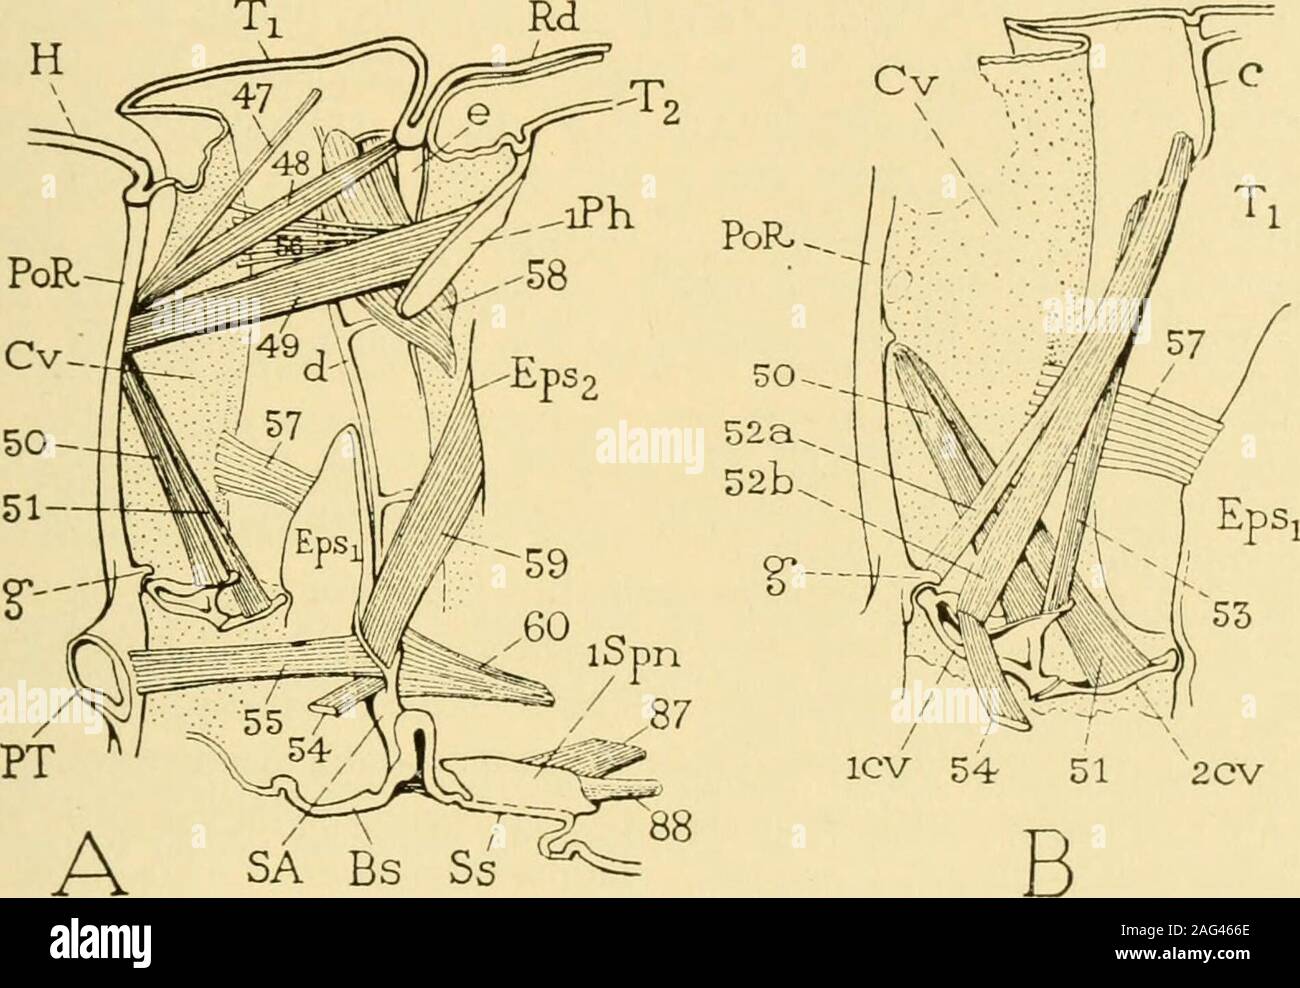 . Smithsonian miscellaneous collections. ified when the generalplan of the segmental musculature is understood. The thoracic mus-cles of insects fall into a few major groups which, in a general way, areas follows: (i) dorsal body muscles; (2^ ventral body muscles; (3)tergo-sternal muscles; (4) special wing muscles; (5) pleuro-sternalmuscles; (6) coxal wing muscles ; (7) body leg muscles ; (8) musclesof the leg segments; (9) muscles of the spiracles. In addition thereare the muscles of the neck plates, and often oblique, lateral interseg-mental muscles. NO. 2 THORACIC MECHANISM OF A GRASSHOPPER Stock Photo